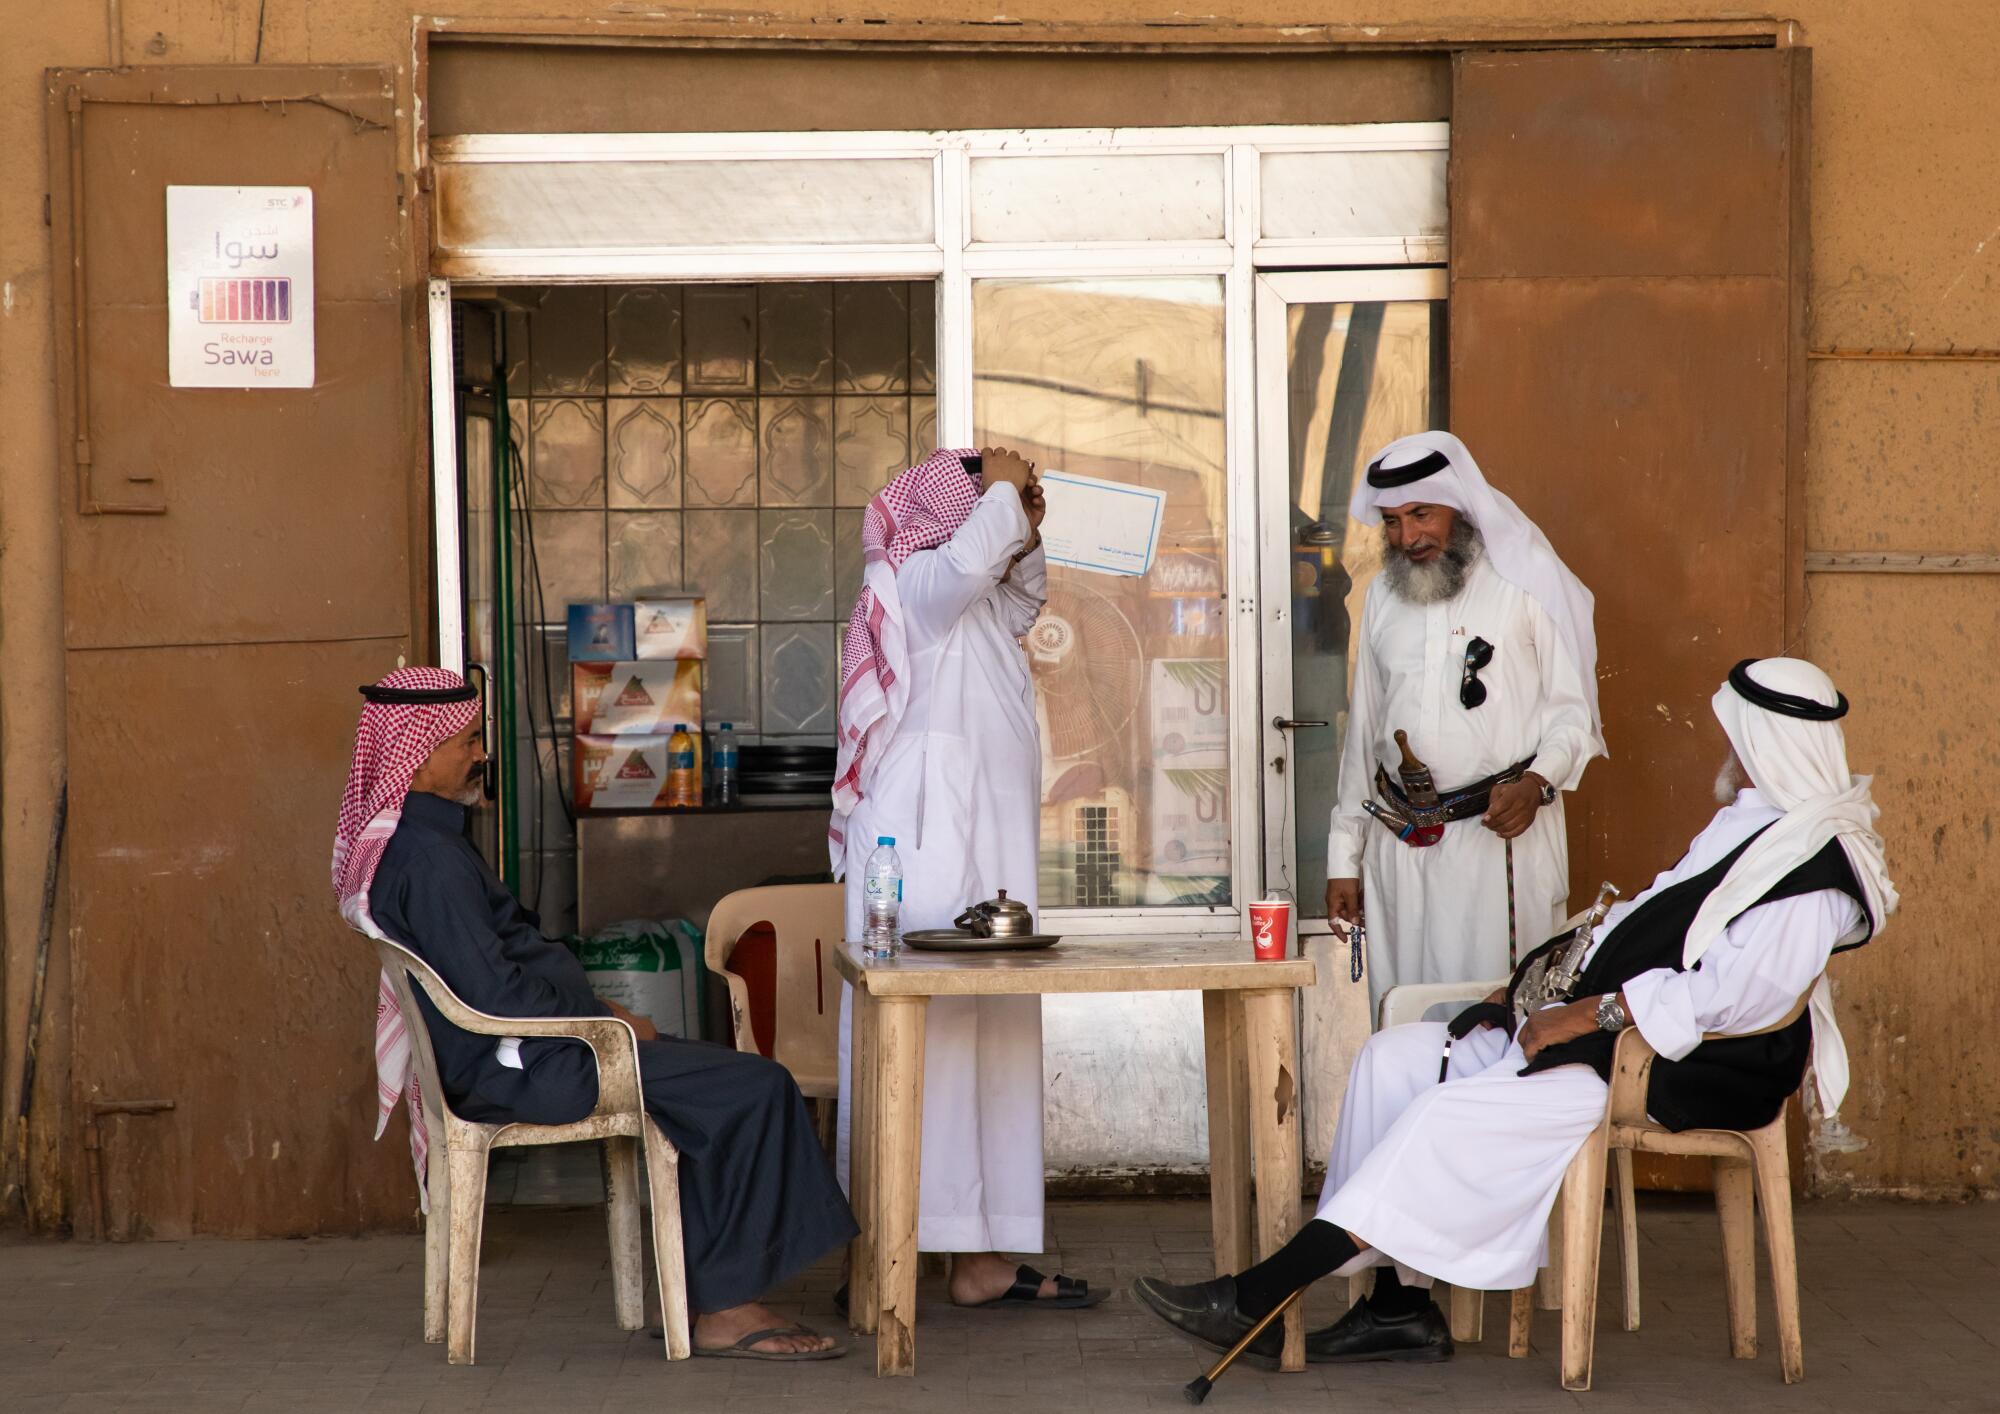 Saudi men gather at an outdoor table to drink coffee.